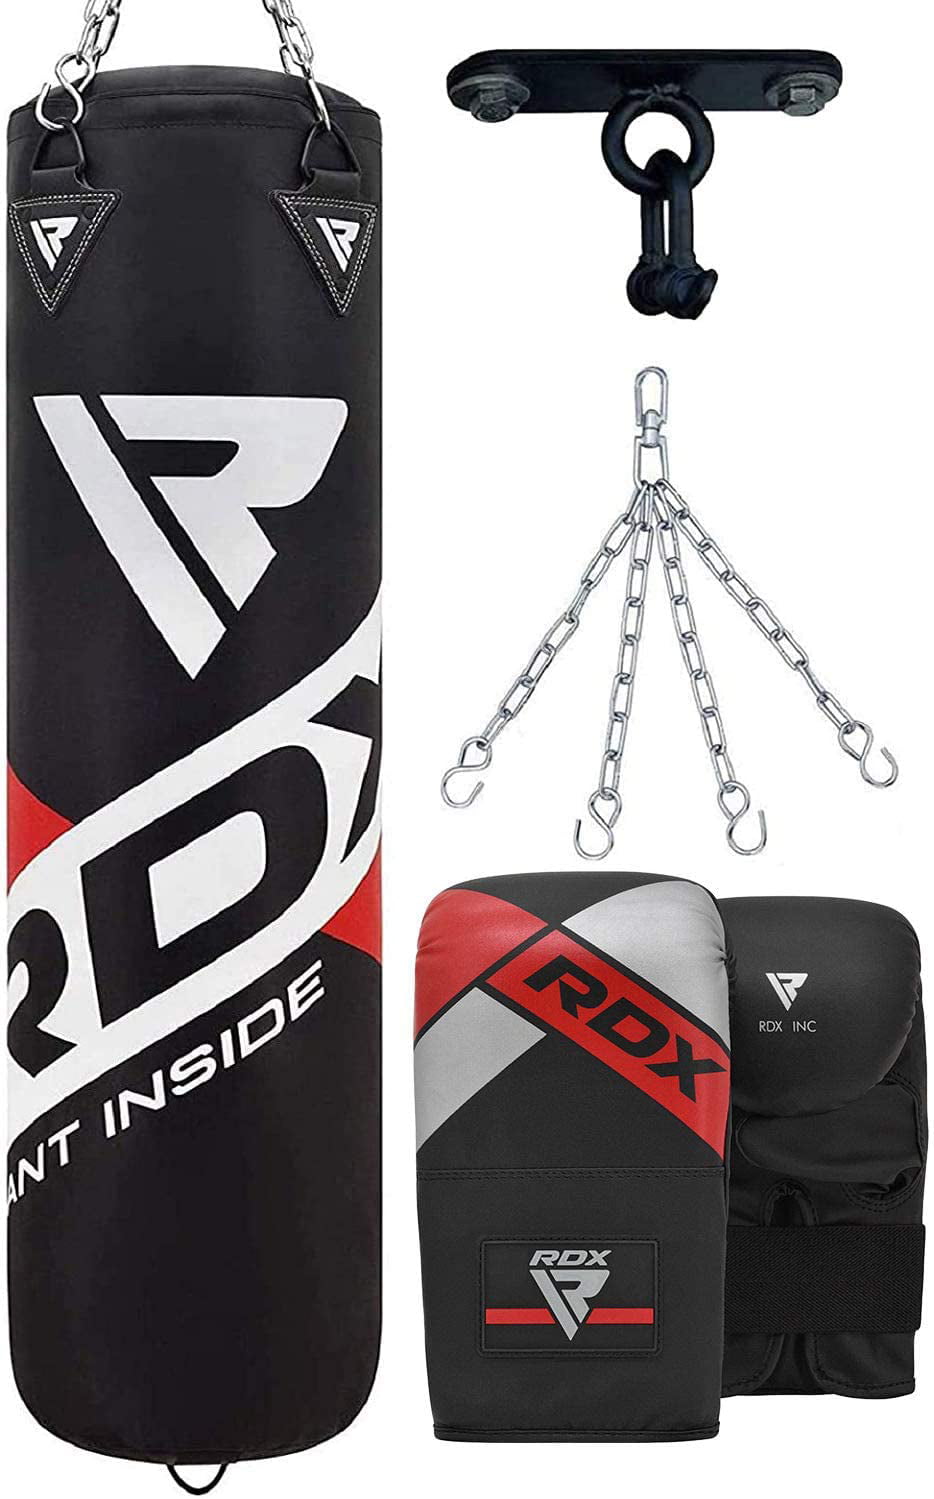 4FT UNFILLED PUNCHING BAG MMA KICK BOXING EXERCISE PUNCHING SPARRING MARTIAL ART 